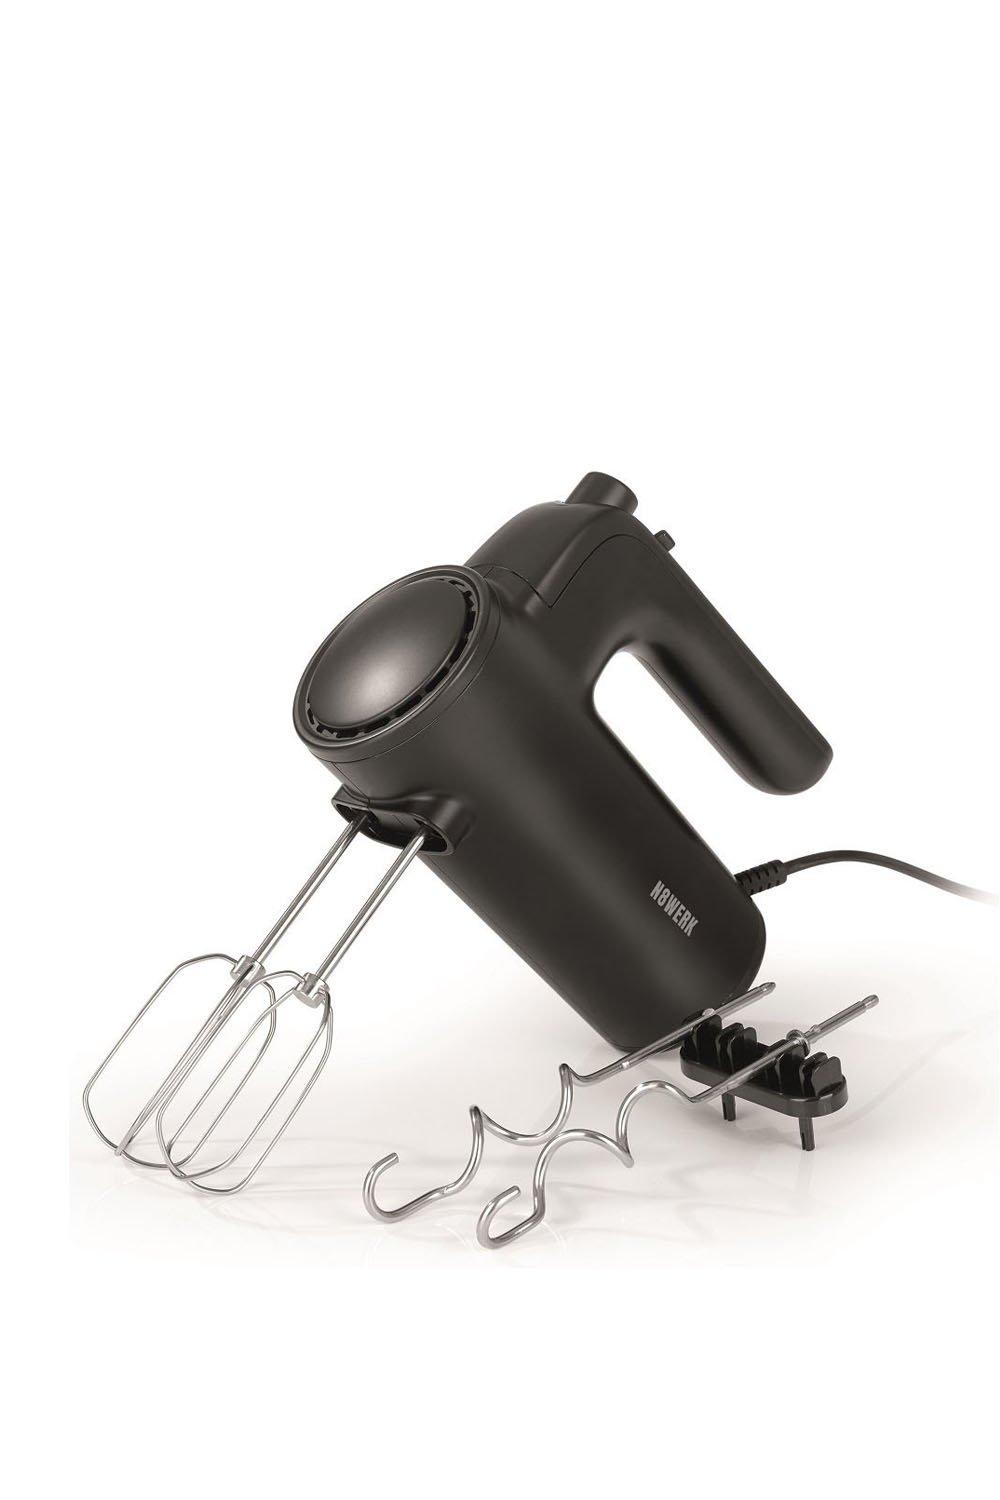 Food Processors & Mixers, Hand Mixer with 3 attachments - Black, 400W